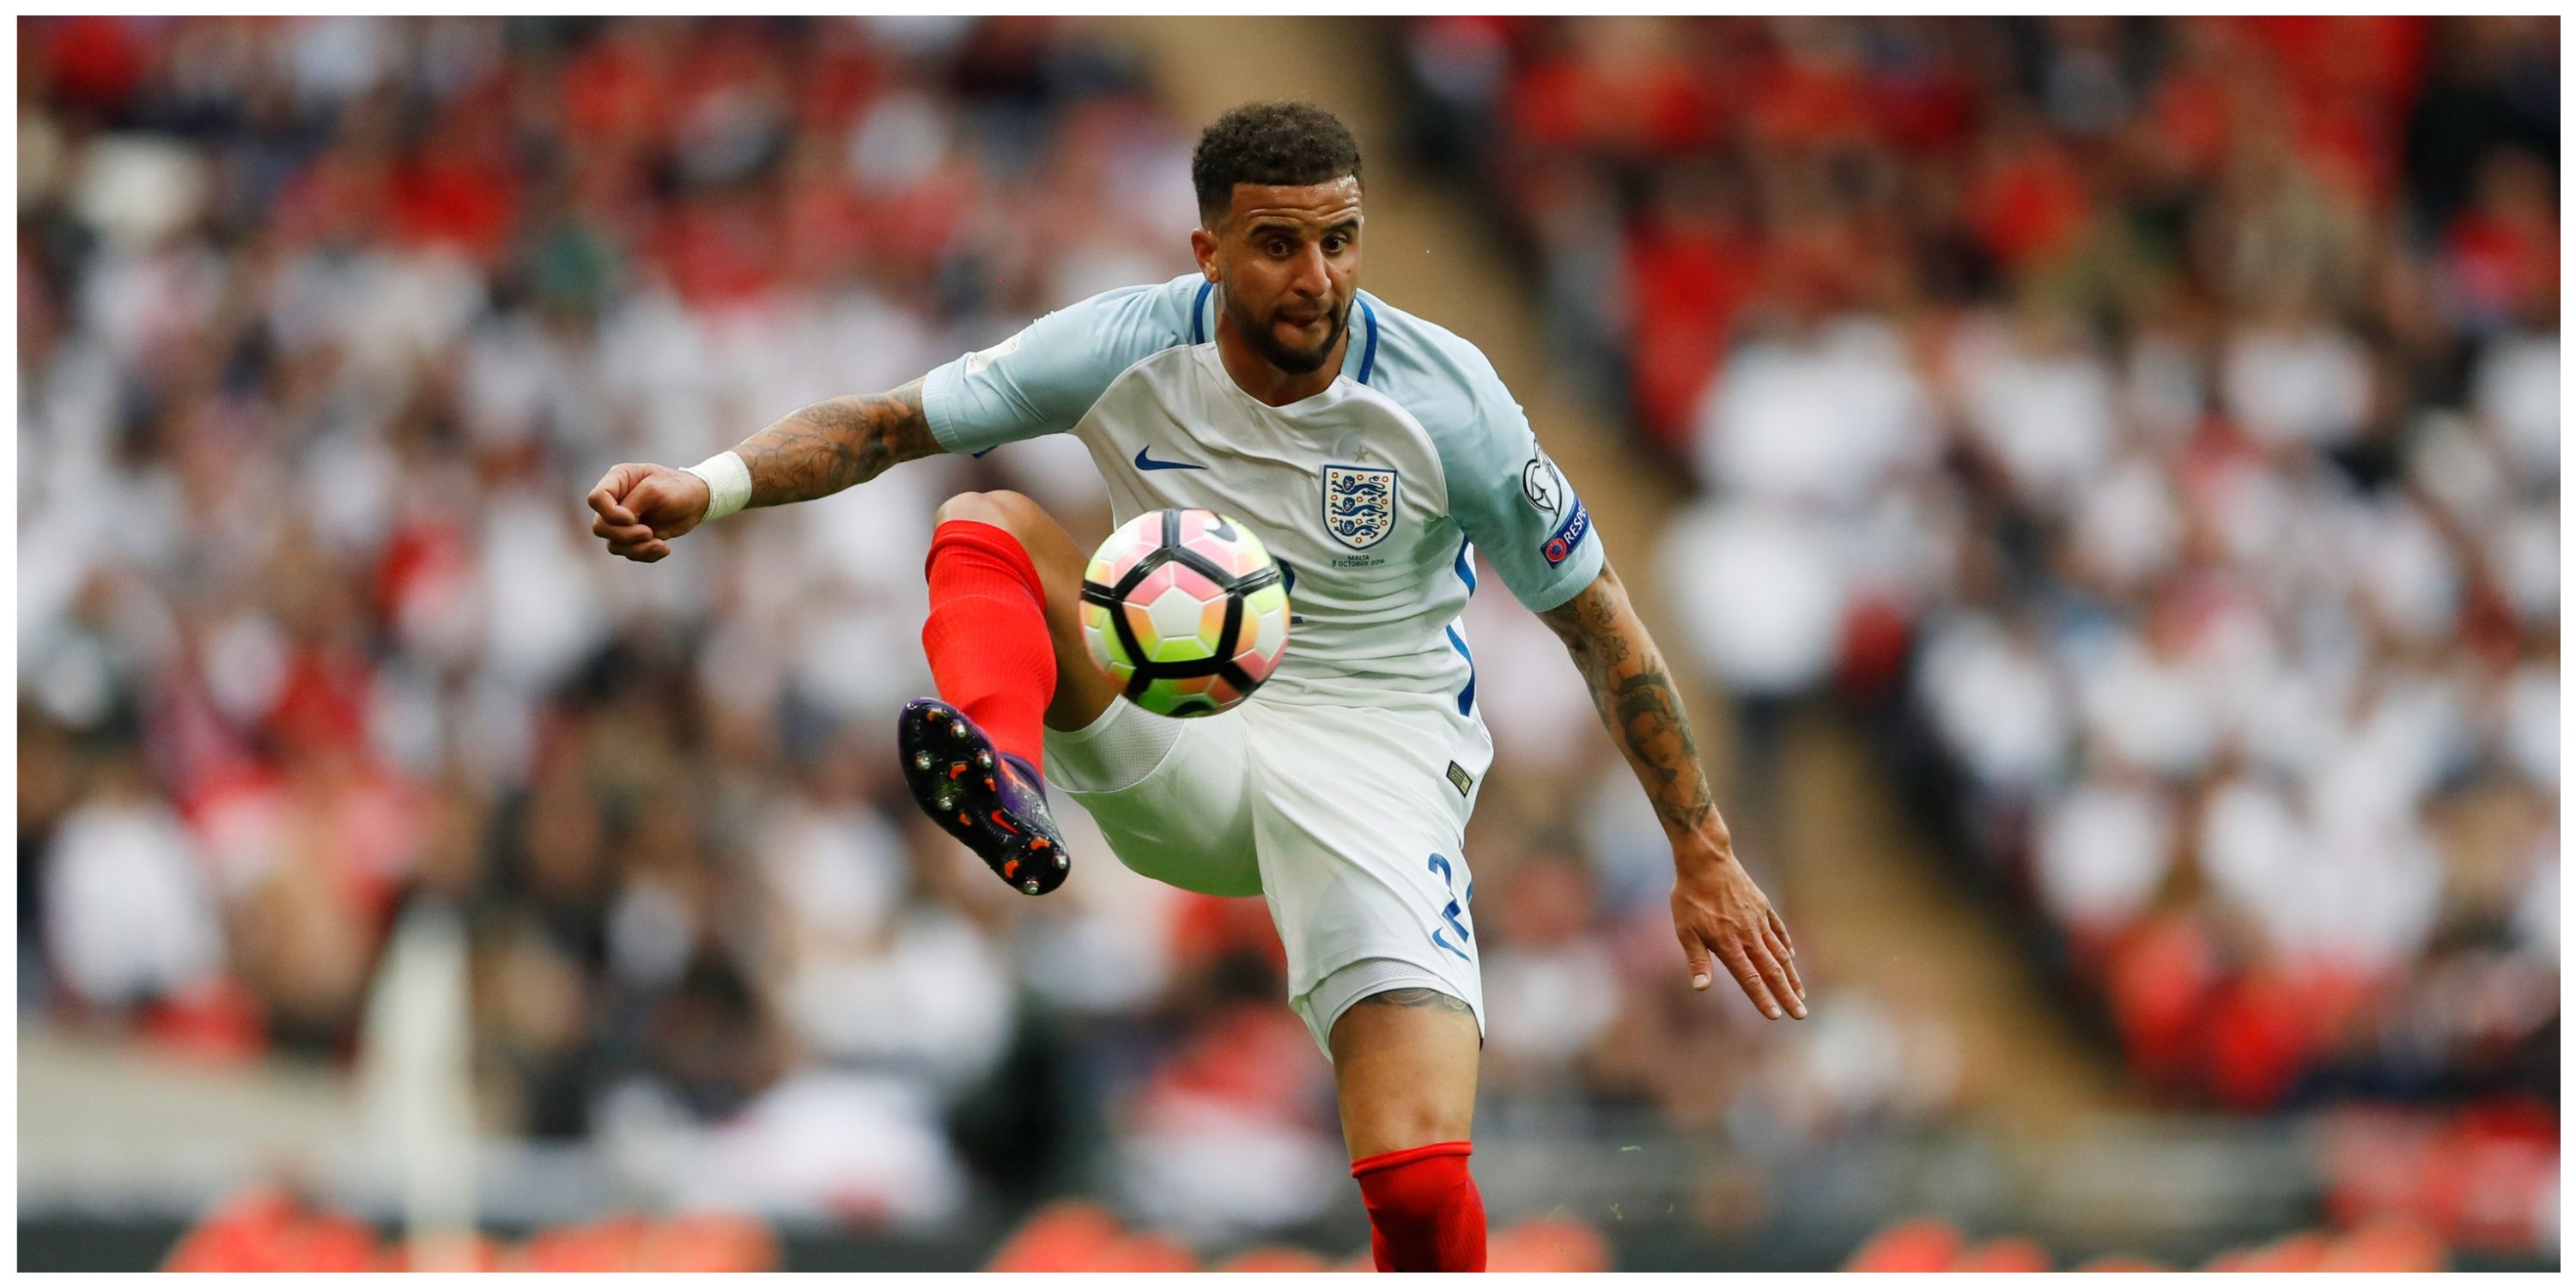 Kyle Walker controlling the ball 2